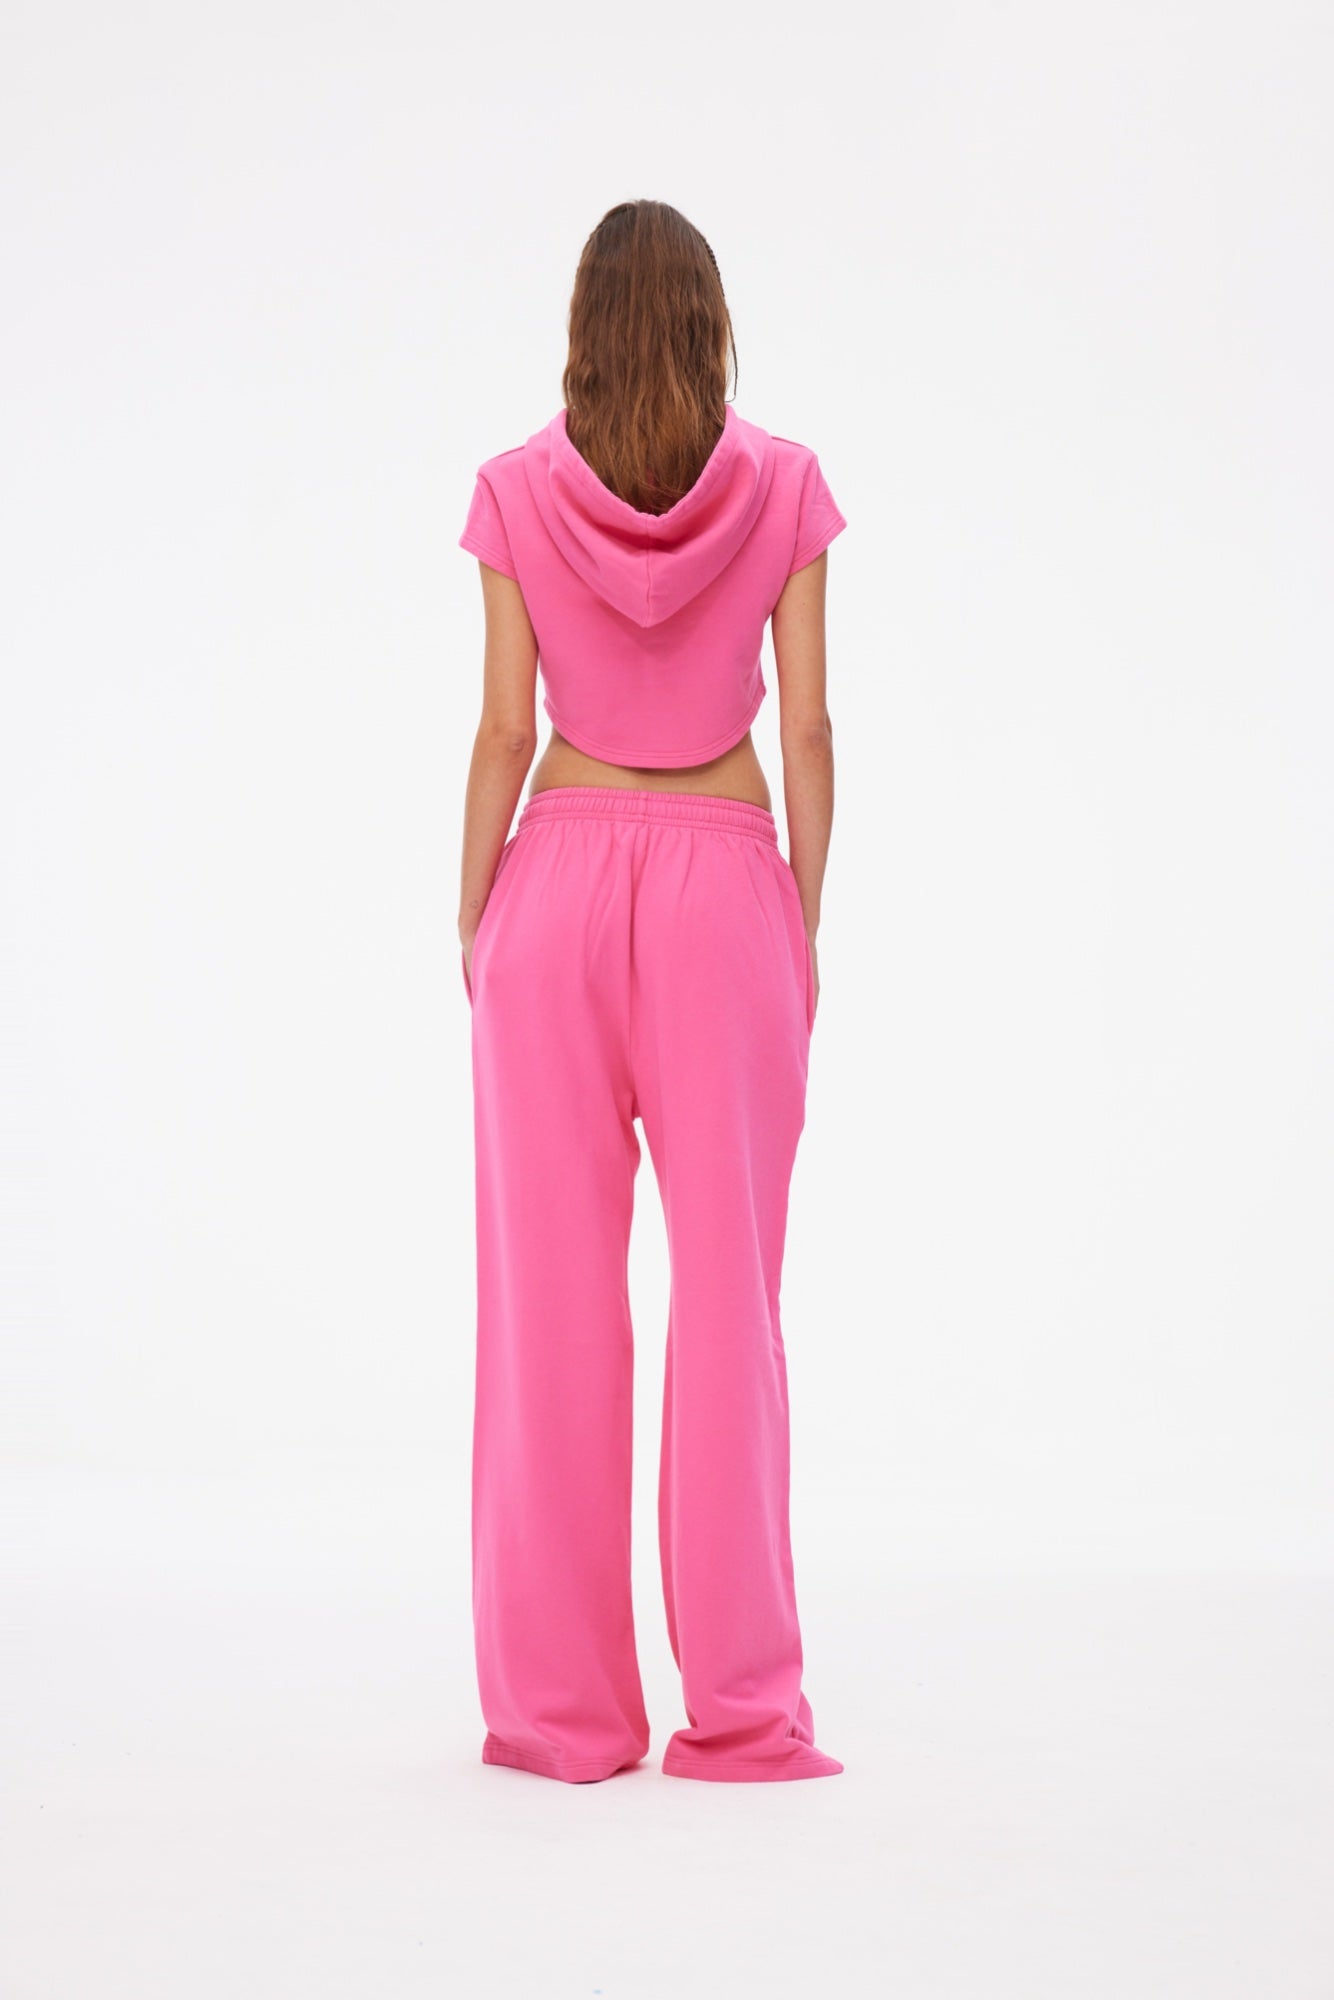 ANN ANDELMAN Gothic Crystal Long Pants Pink | MADA IN CHINA